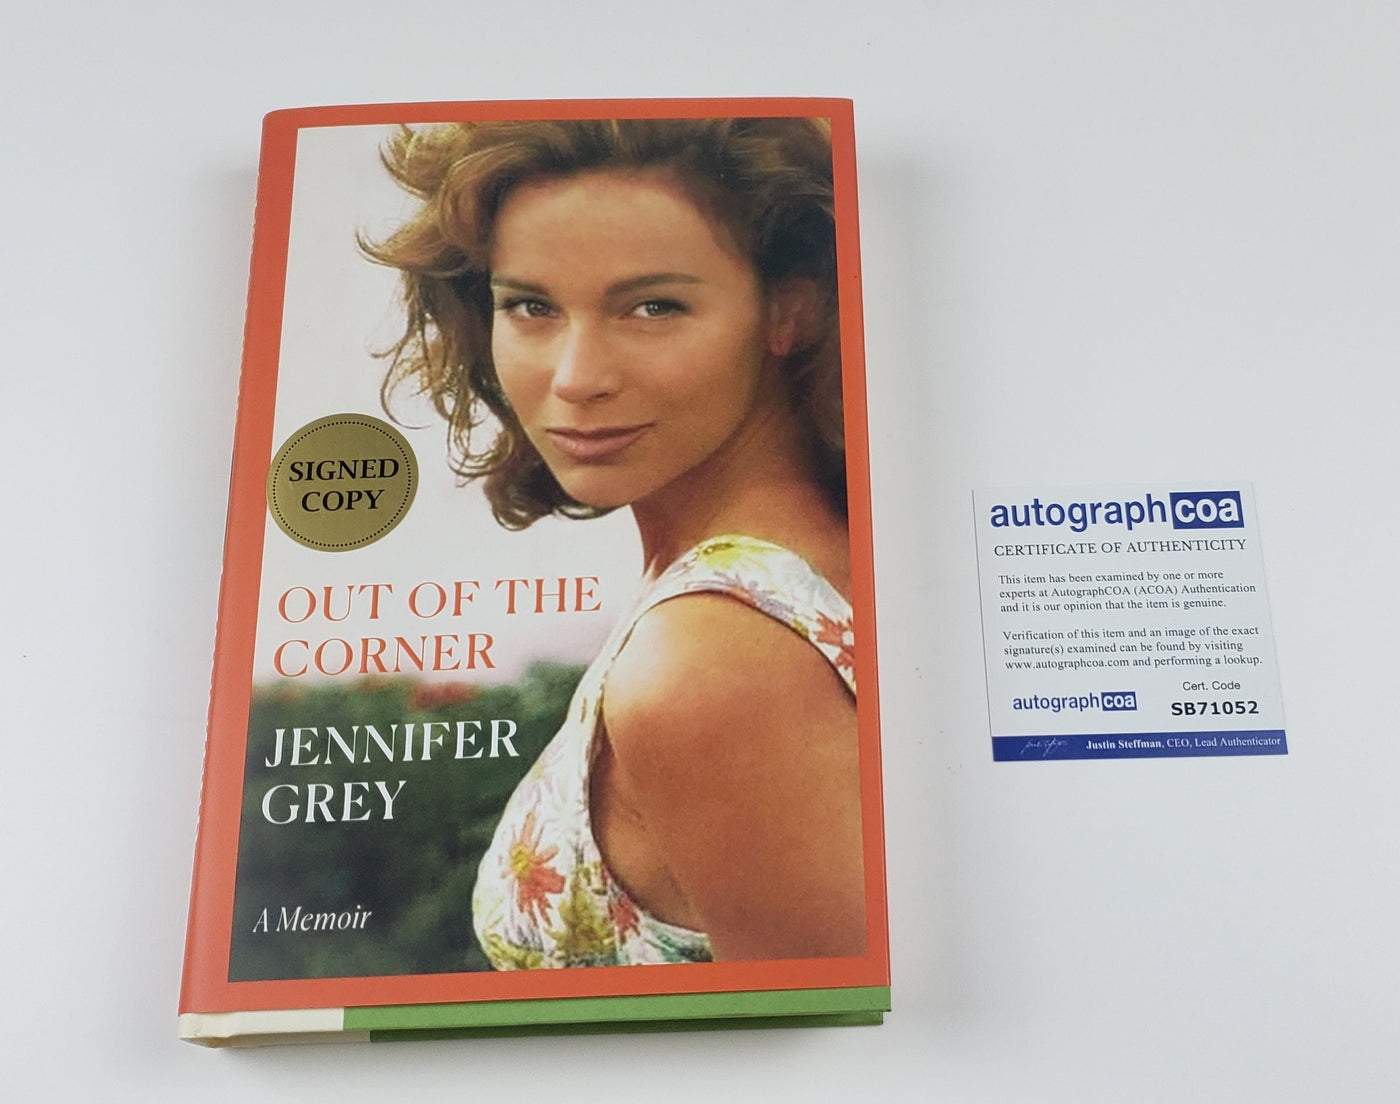 Jennifer Grey Autographed Signed Book Out Of The Corner Dirty Dancing ACOA COA